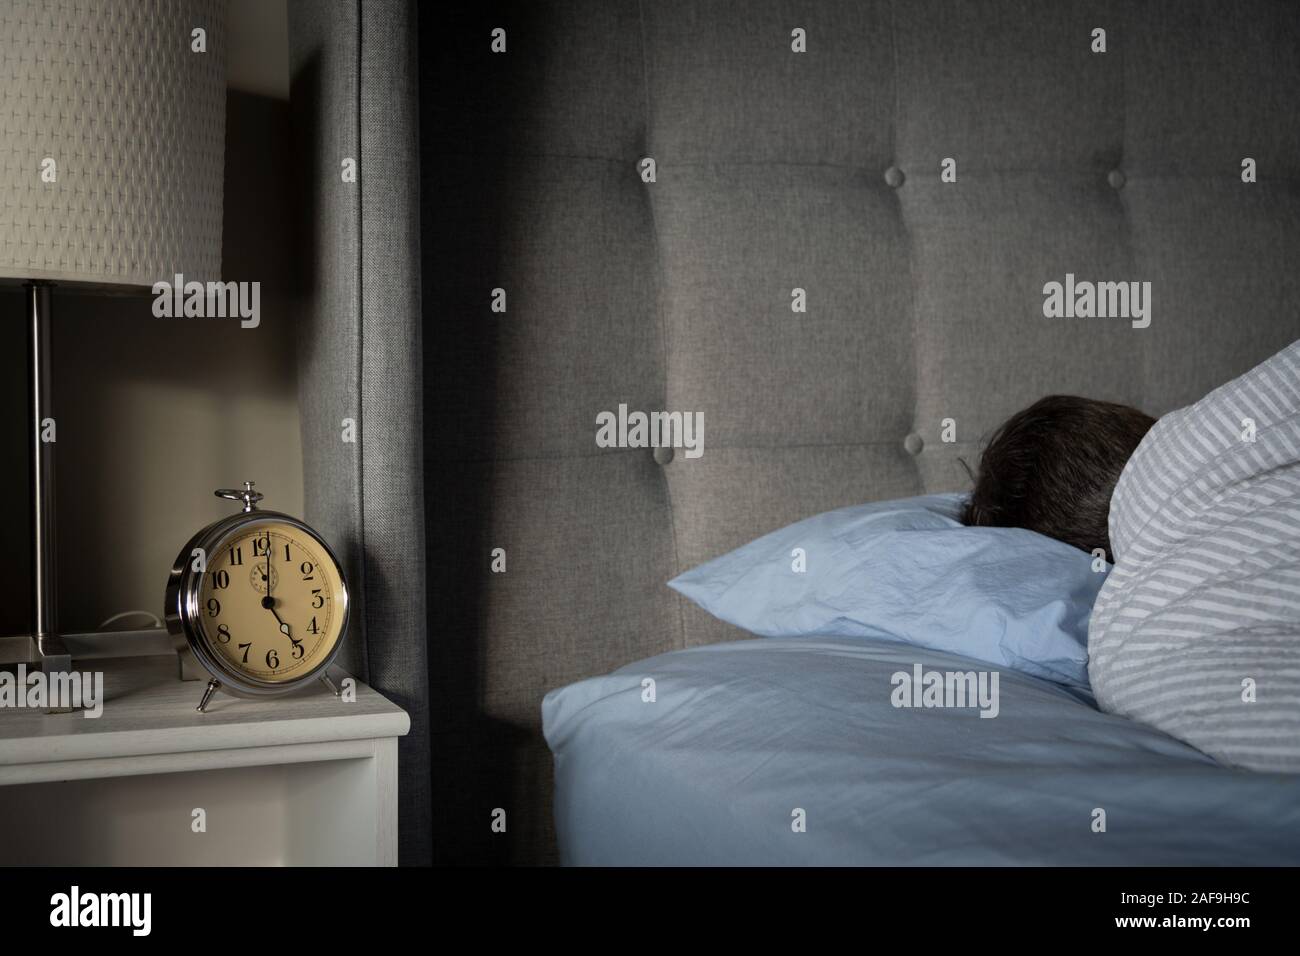 Person sleeping in bed with alarm clock on night stand. Stock Photo